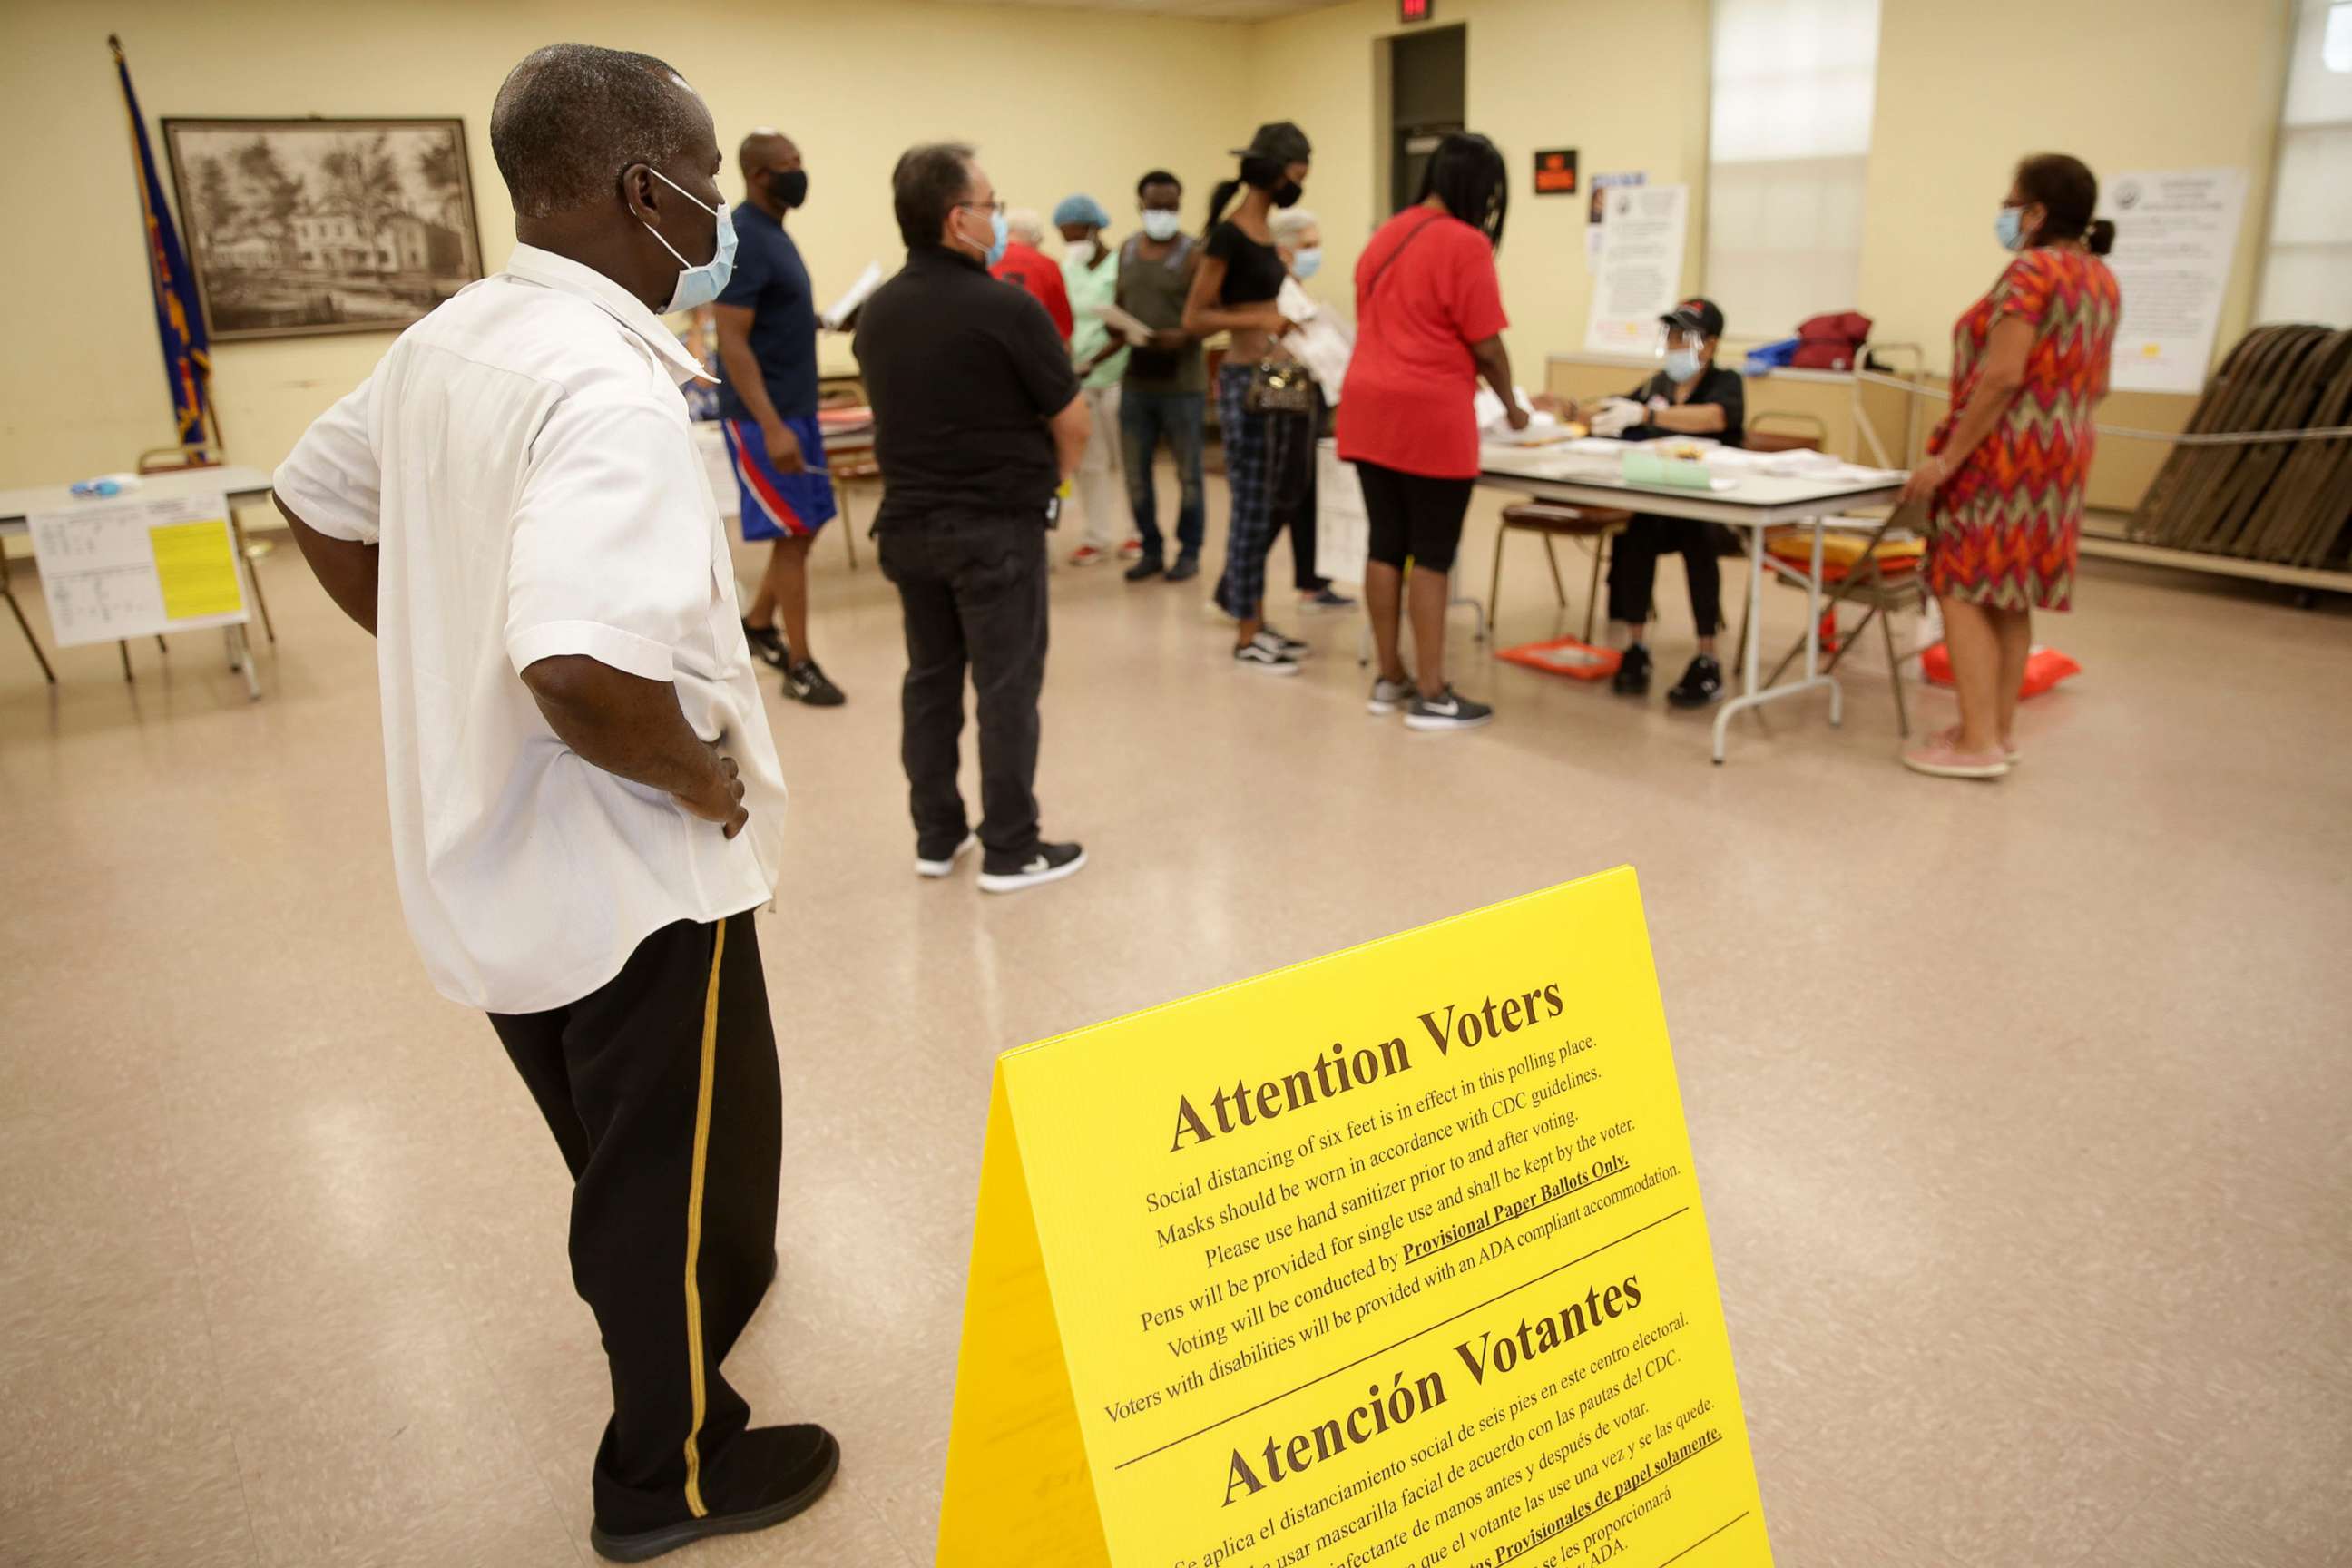 PHOTO: Voters wait in line to receive provisional ballots at a polling site in Hackensack, N.J., July 7, 2020.